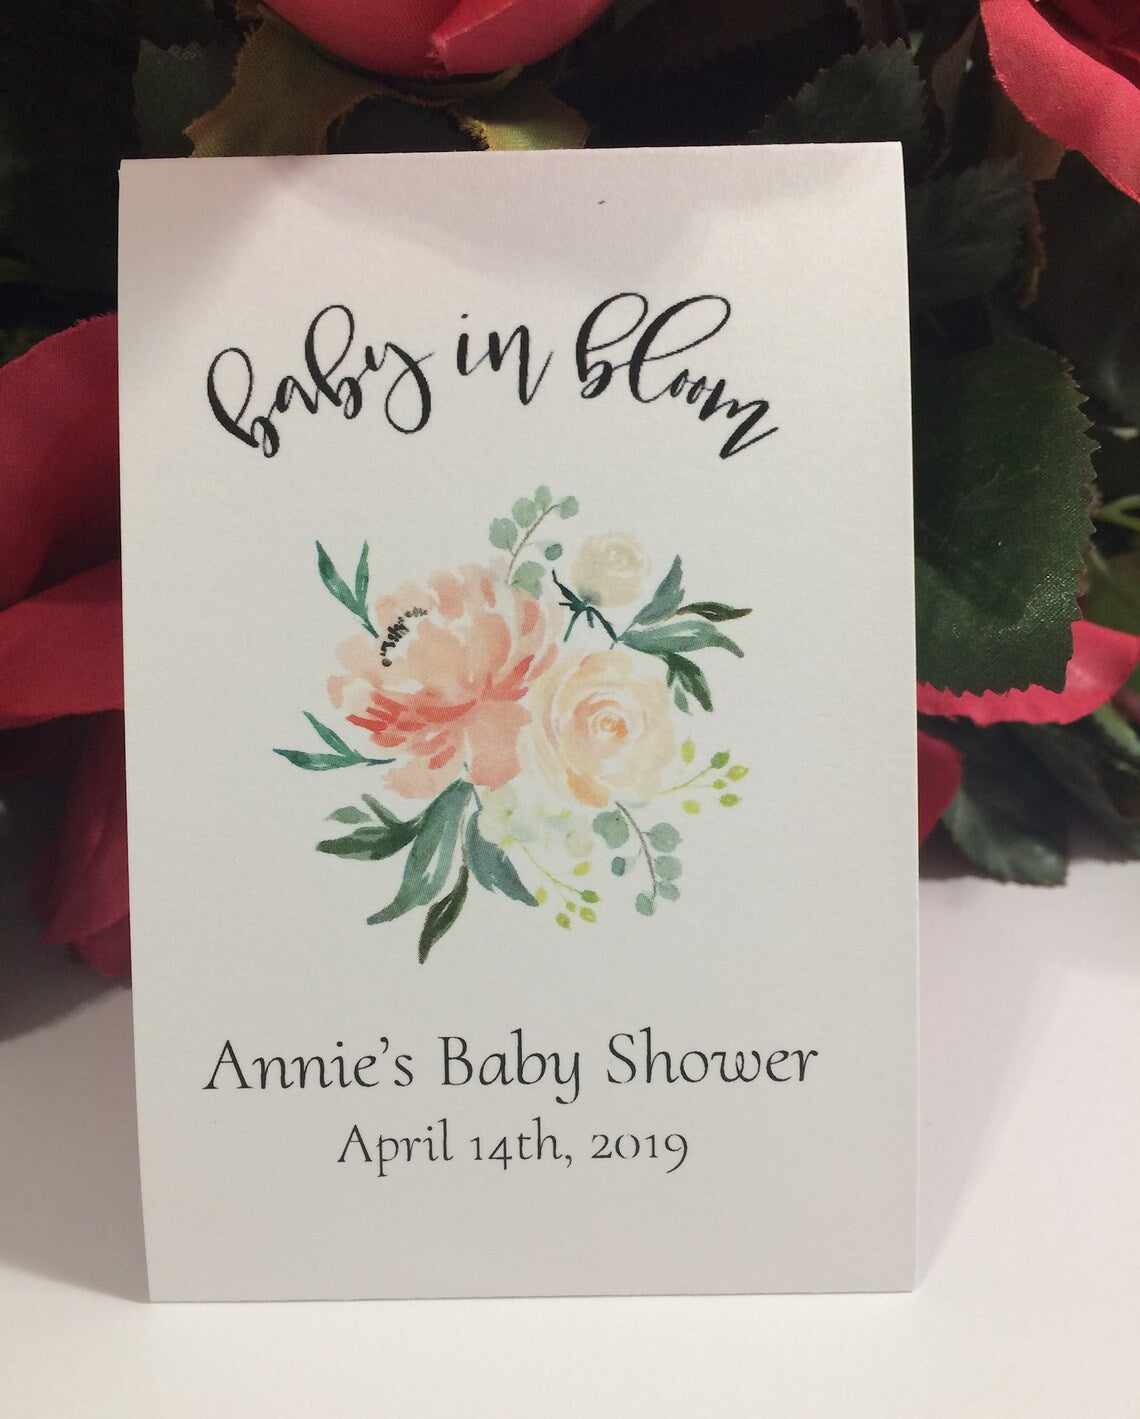 Baby in Bloom, Personalized Baby Shower Seed Packet Favors